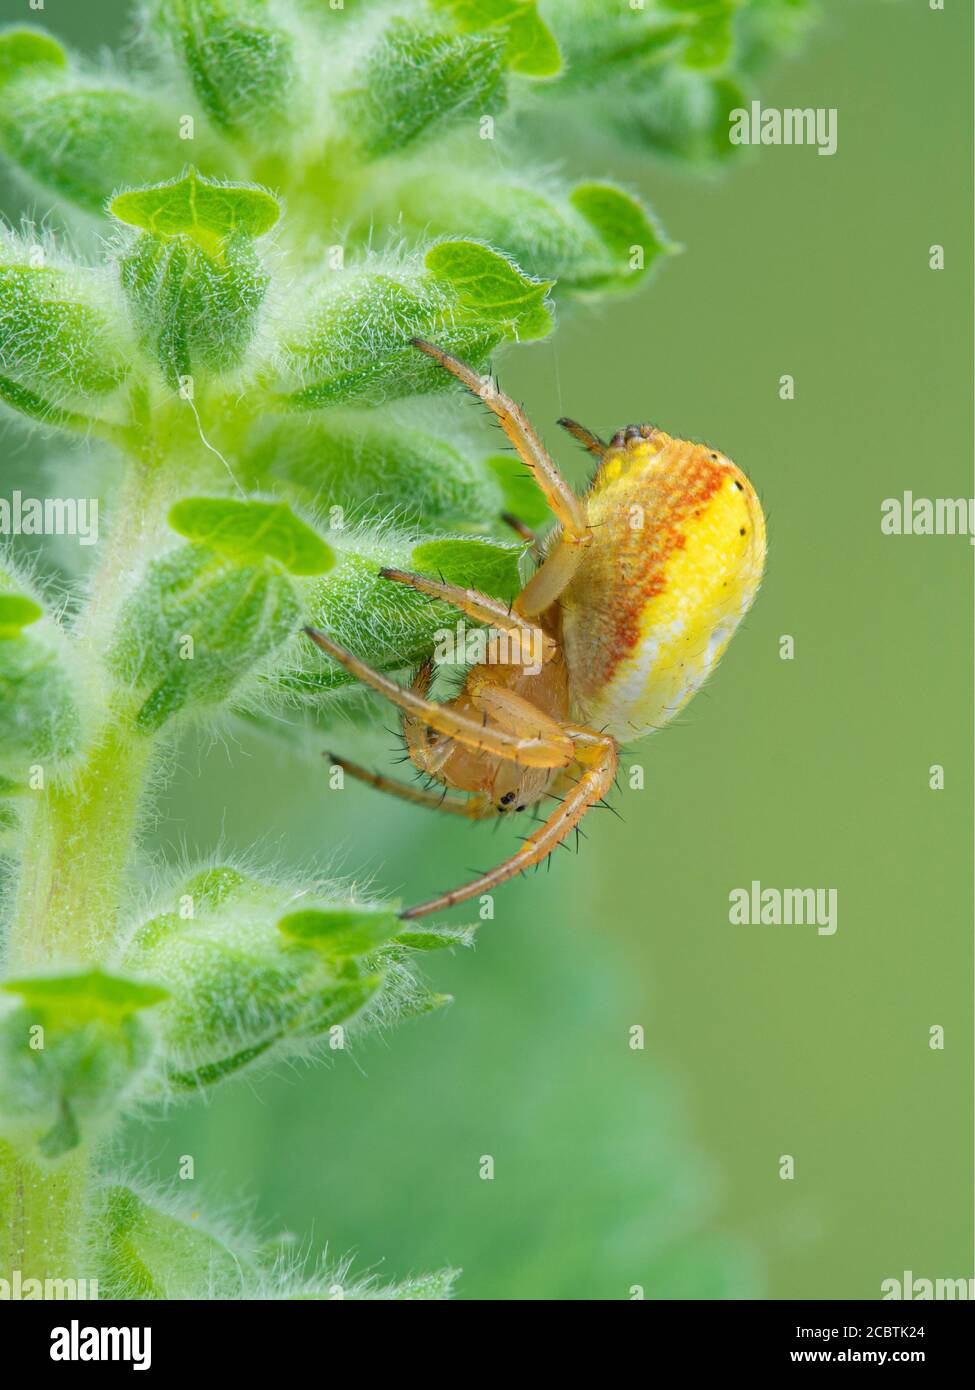 Side view of the face of a pretty sixspotted orbweaver spider (Araniella displicata) climbing on a fuzzy plant,  Deas Isand, Delta, British Columbia, Stock Photo